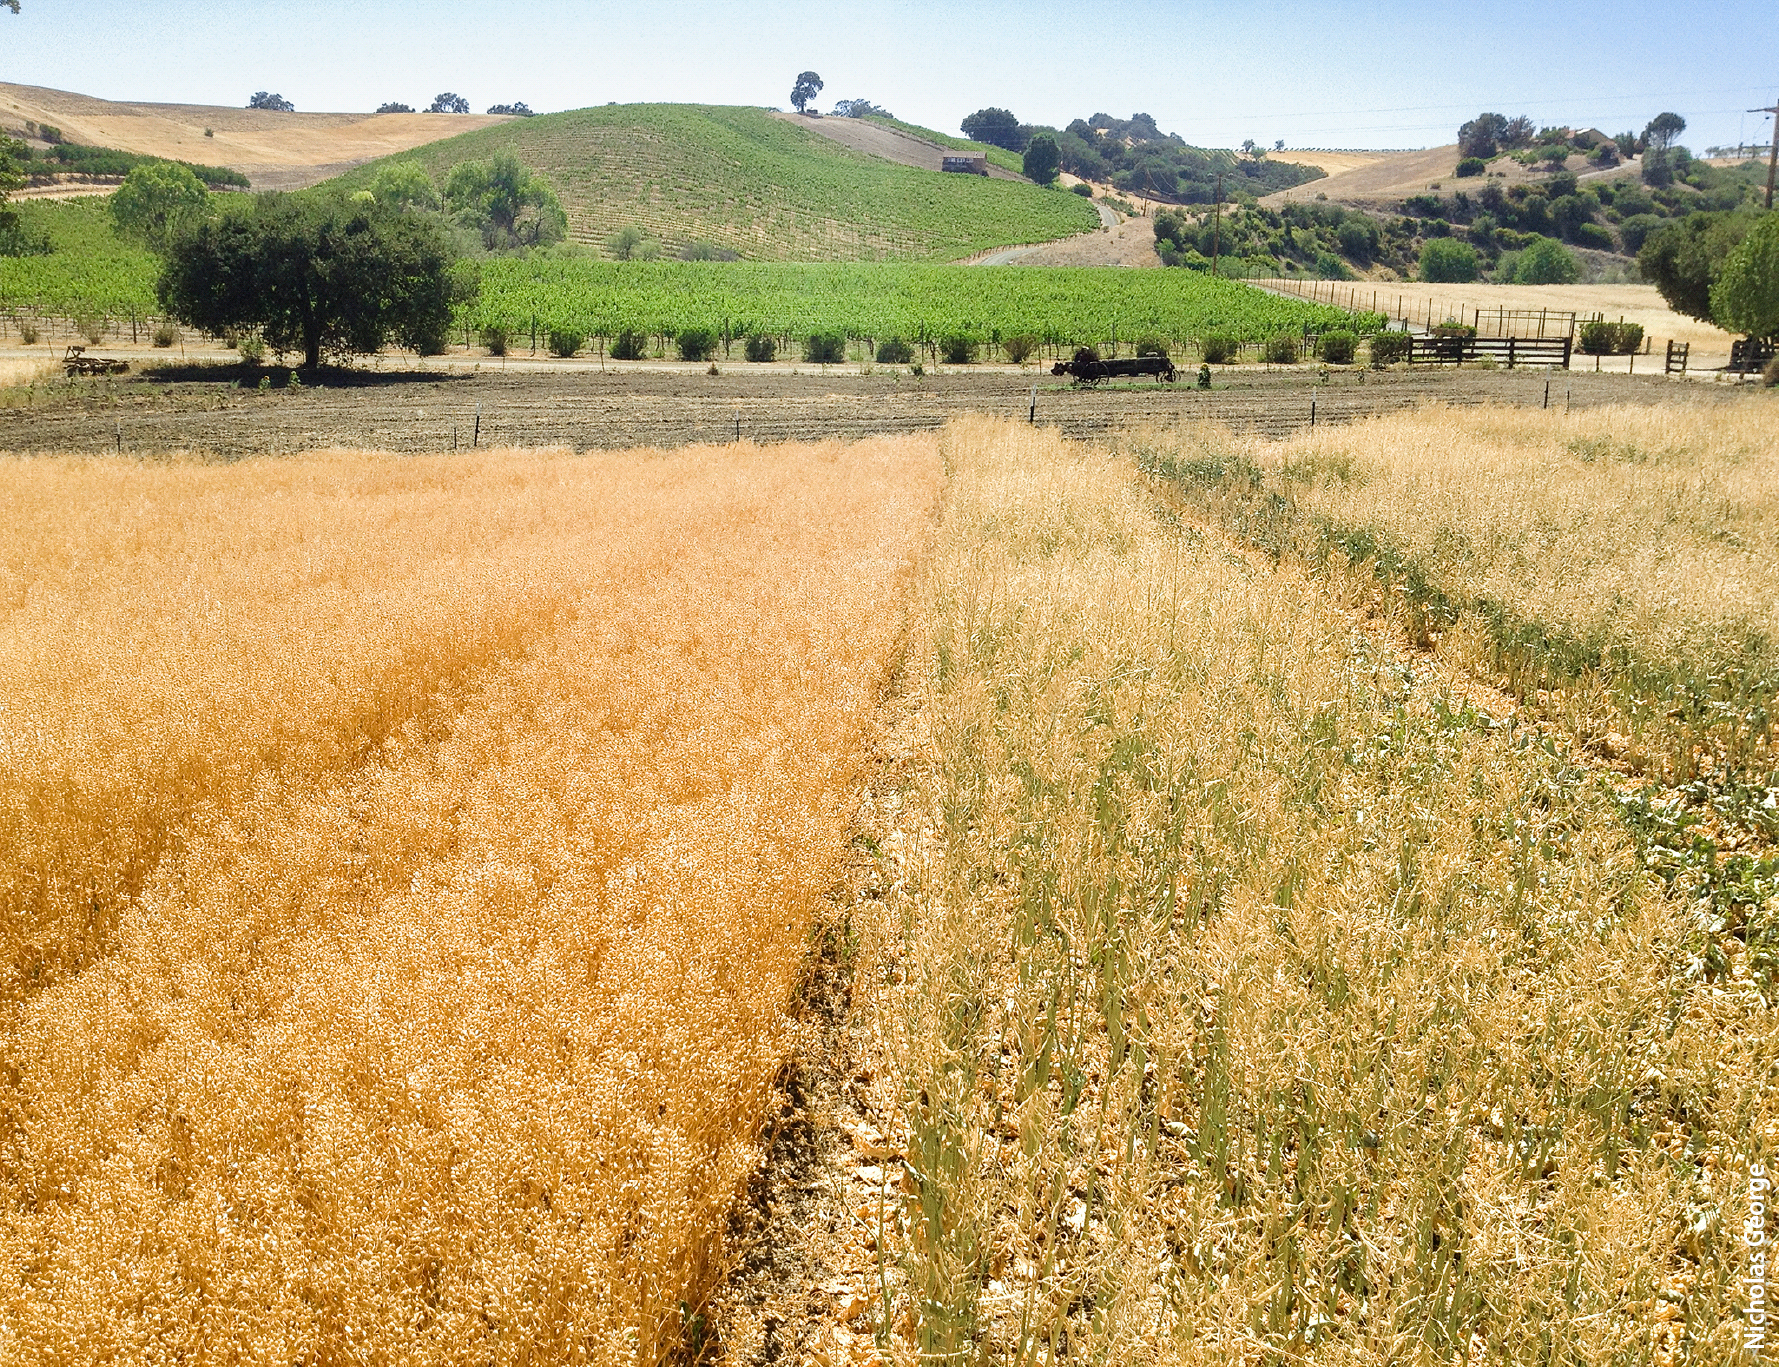 Although camelina has lower yields, it is more drought tolerant than canola and is a less risky option when canola cannot be planted as a result of suboptimal seedbed conditions. At Rossier Family Farm in Paso Robles, this field of camelina (left) produced a harvestable crop, while an adjacent field of canola (right) failed due to a lack of rain.